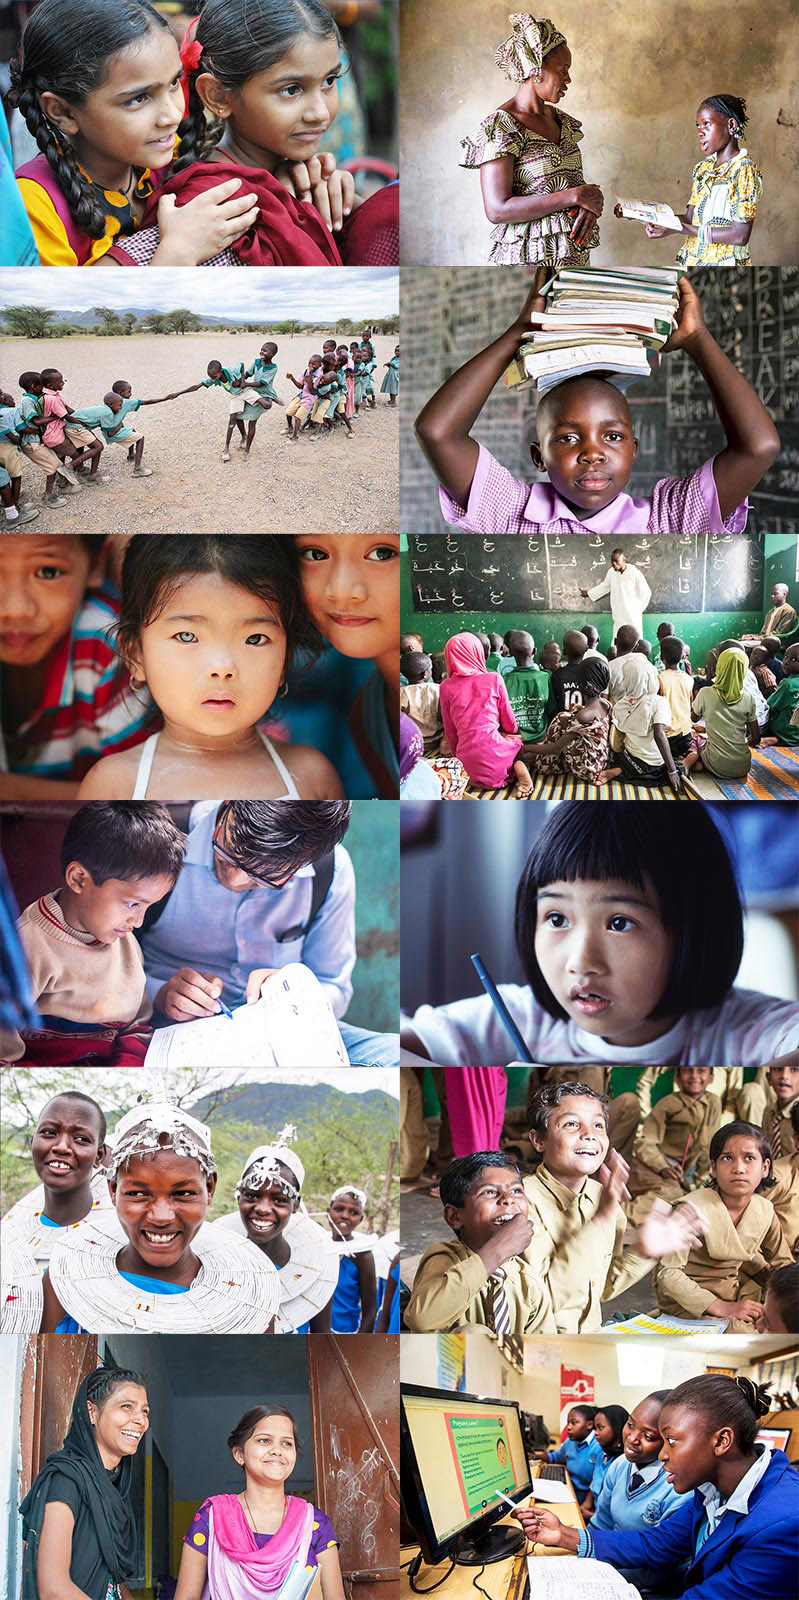 Collage of students across the globe. Photos by Dana Schmidt and Images of Empowerment. Do not copy without permission.